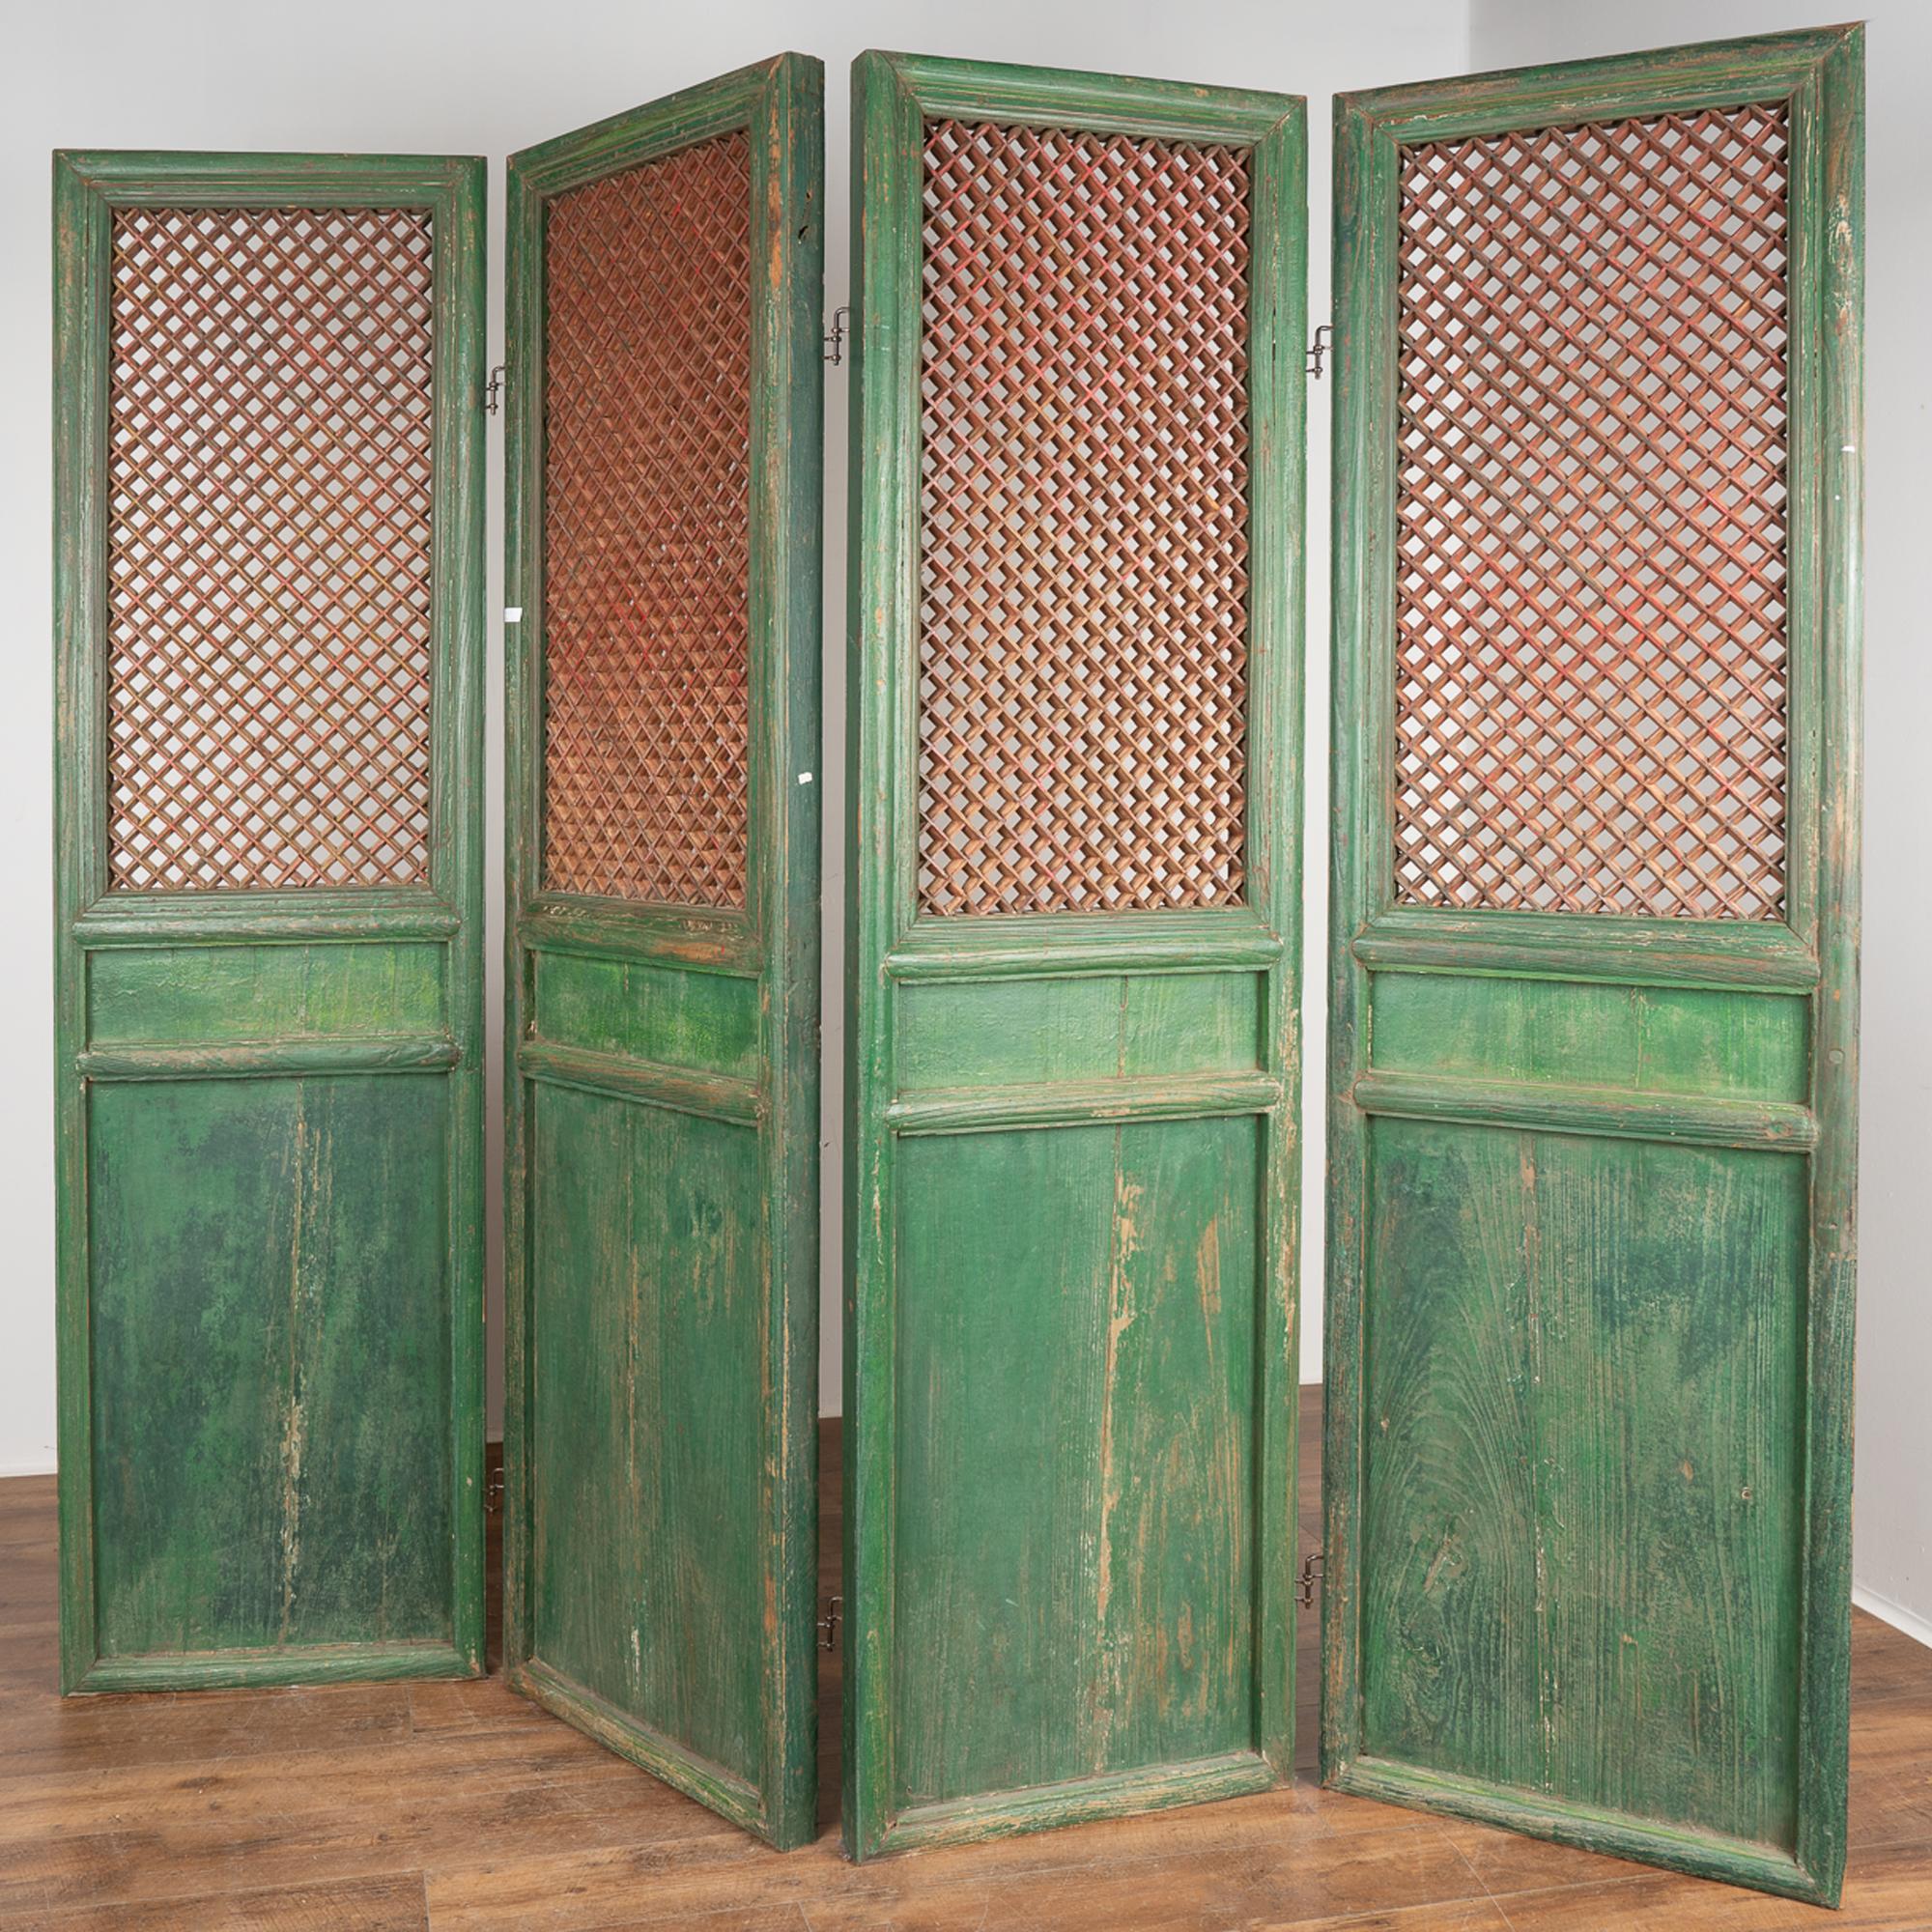 A set of four large carved elm wood interior folding screen panels that still maintain their original green painted finish, topped by traditional Chinese fretwork design left in contrasting natural wood with faint, residual red paint.
Each of the